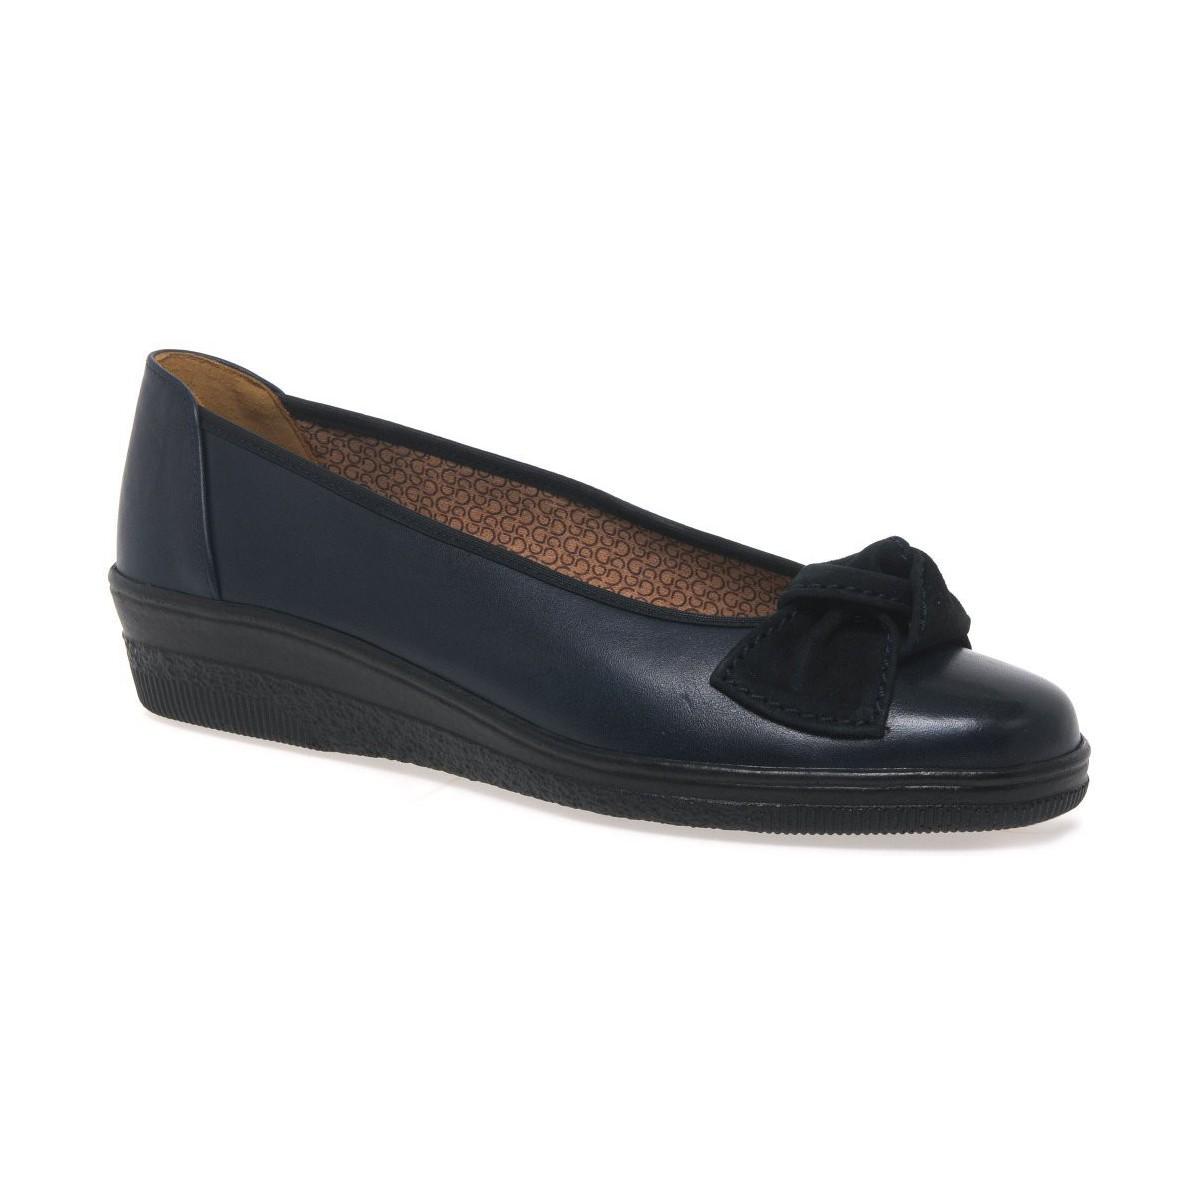 Gabor Leather Lesley Womens Casual Ballet Wedge Heel Shoes in Navy (Blue) Lyst